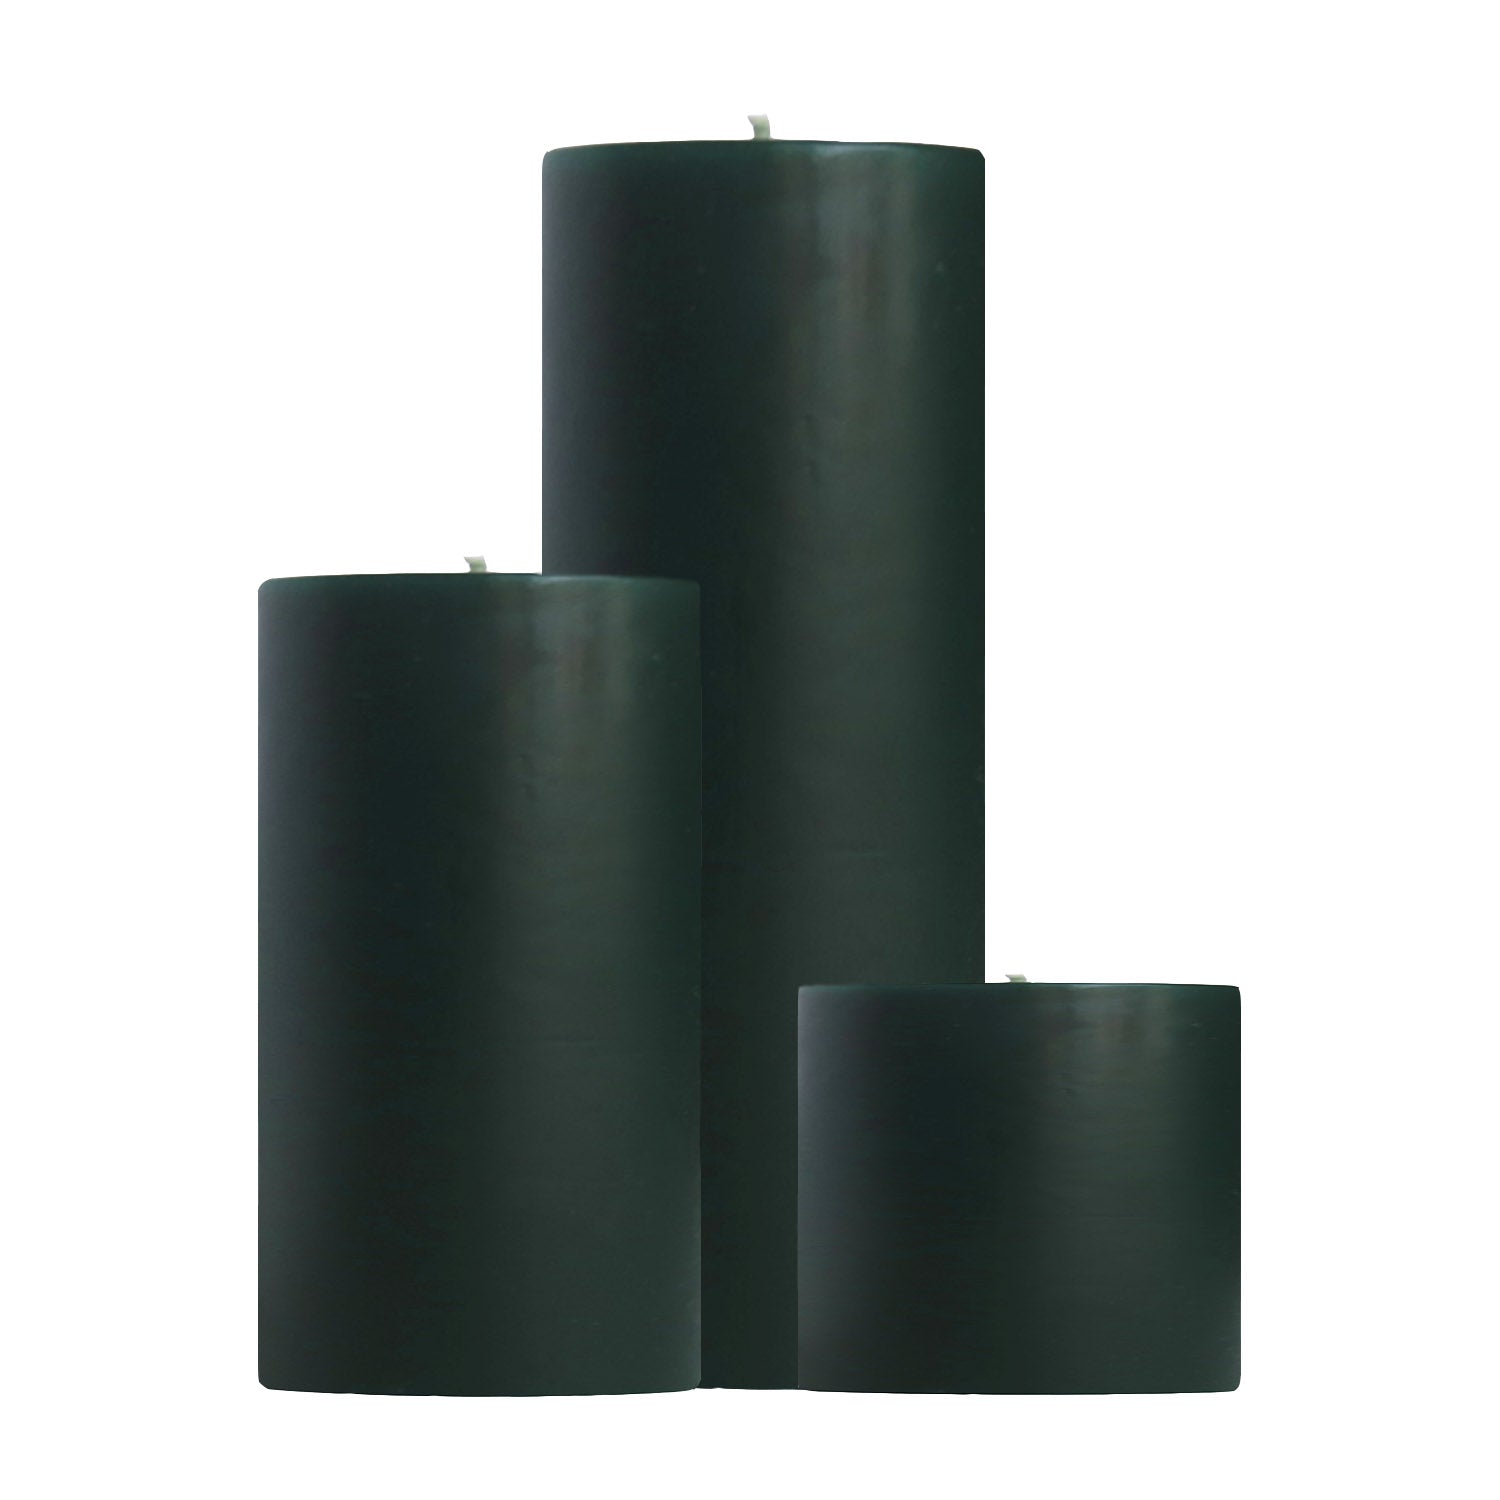 Northern Pine Scented Pillar Candles